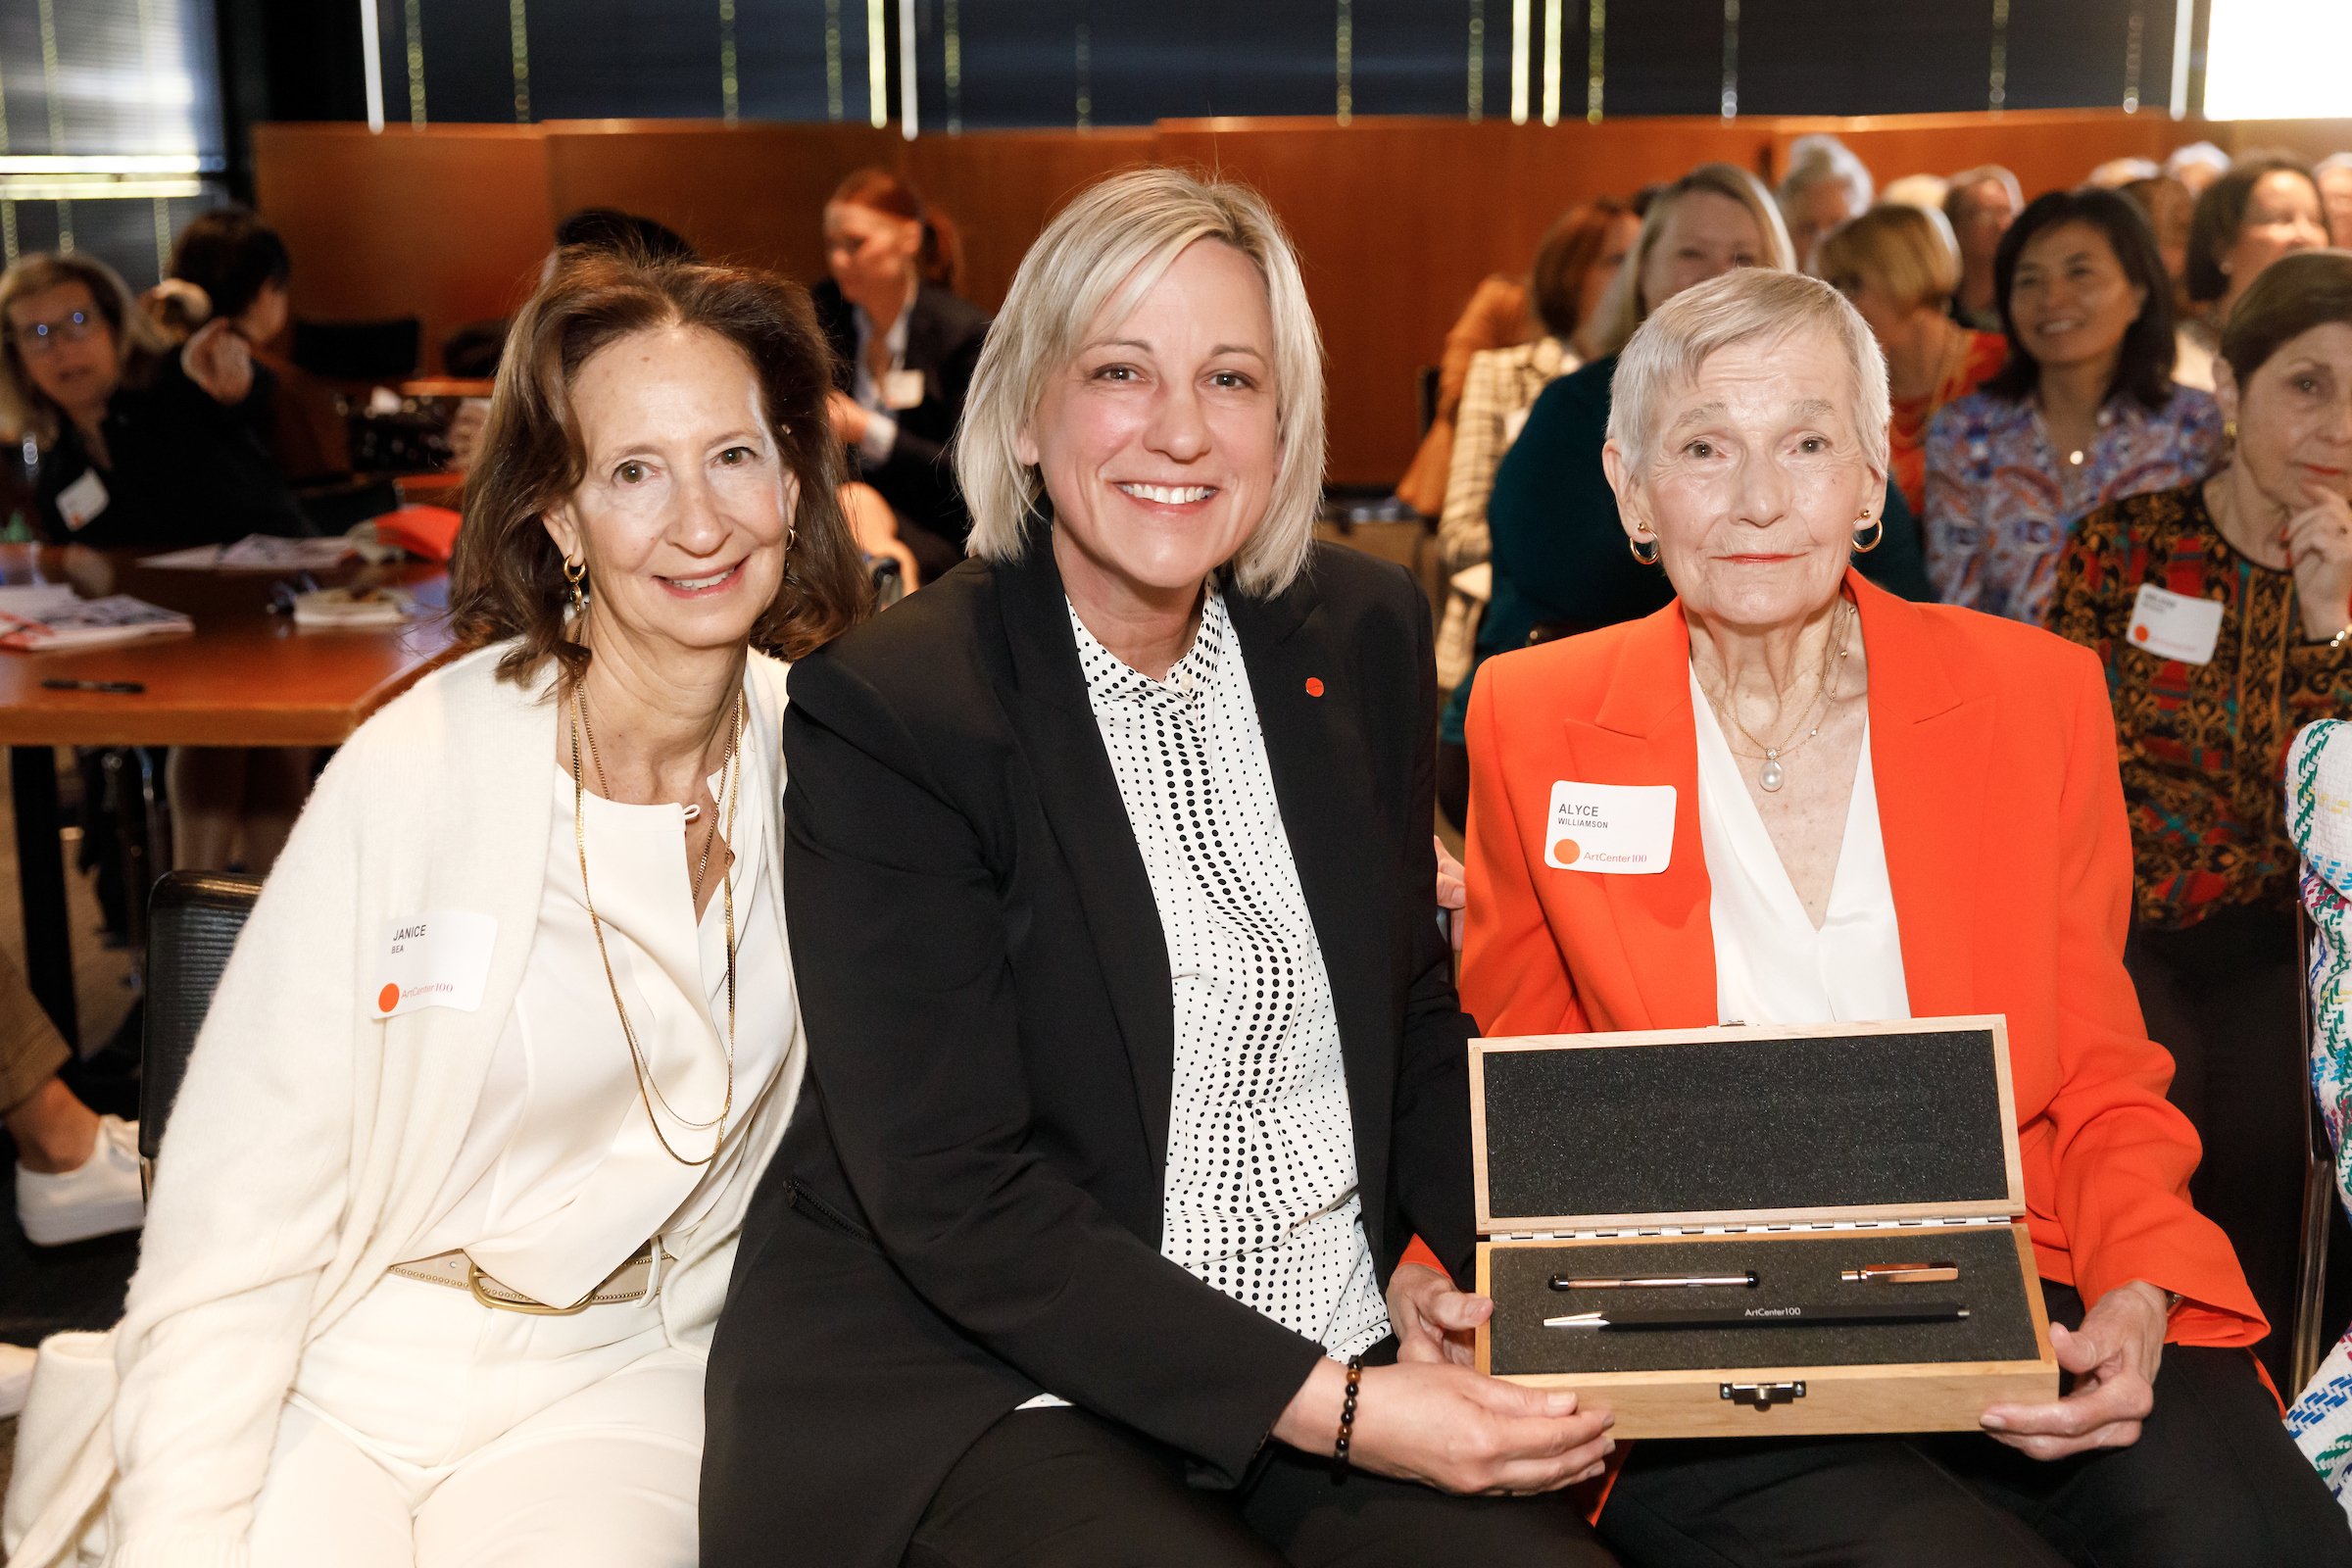 Current ArtCenter100 President Janice Bea with ArtCenter President and CEO Karen Hofmann presenting the honorary engraved pencil to ArtCenter100 founder Alyce de Roulet Williamson on November 3, 2023 in Pasadena. © ArtCenter College of Design/Juan Posada 